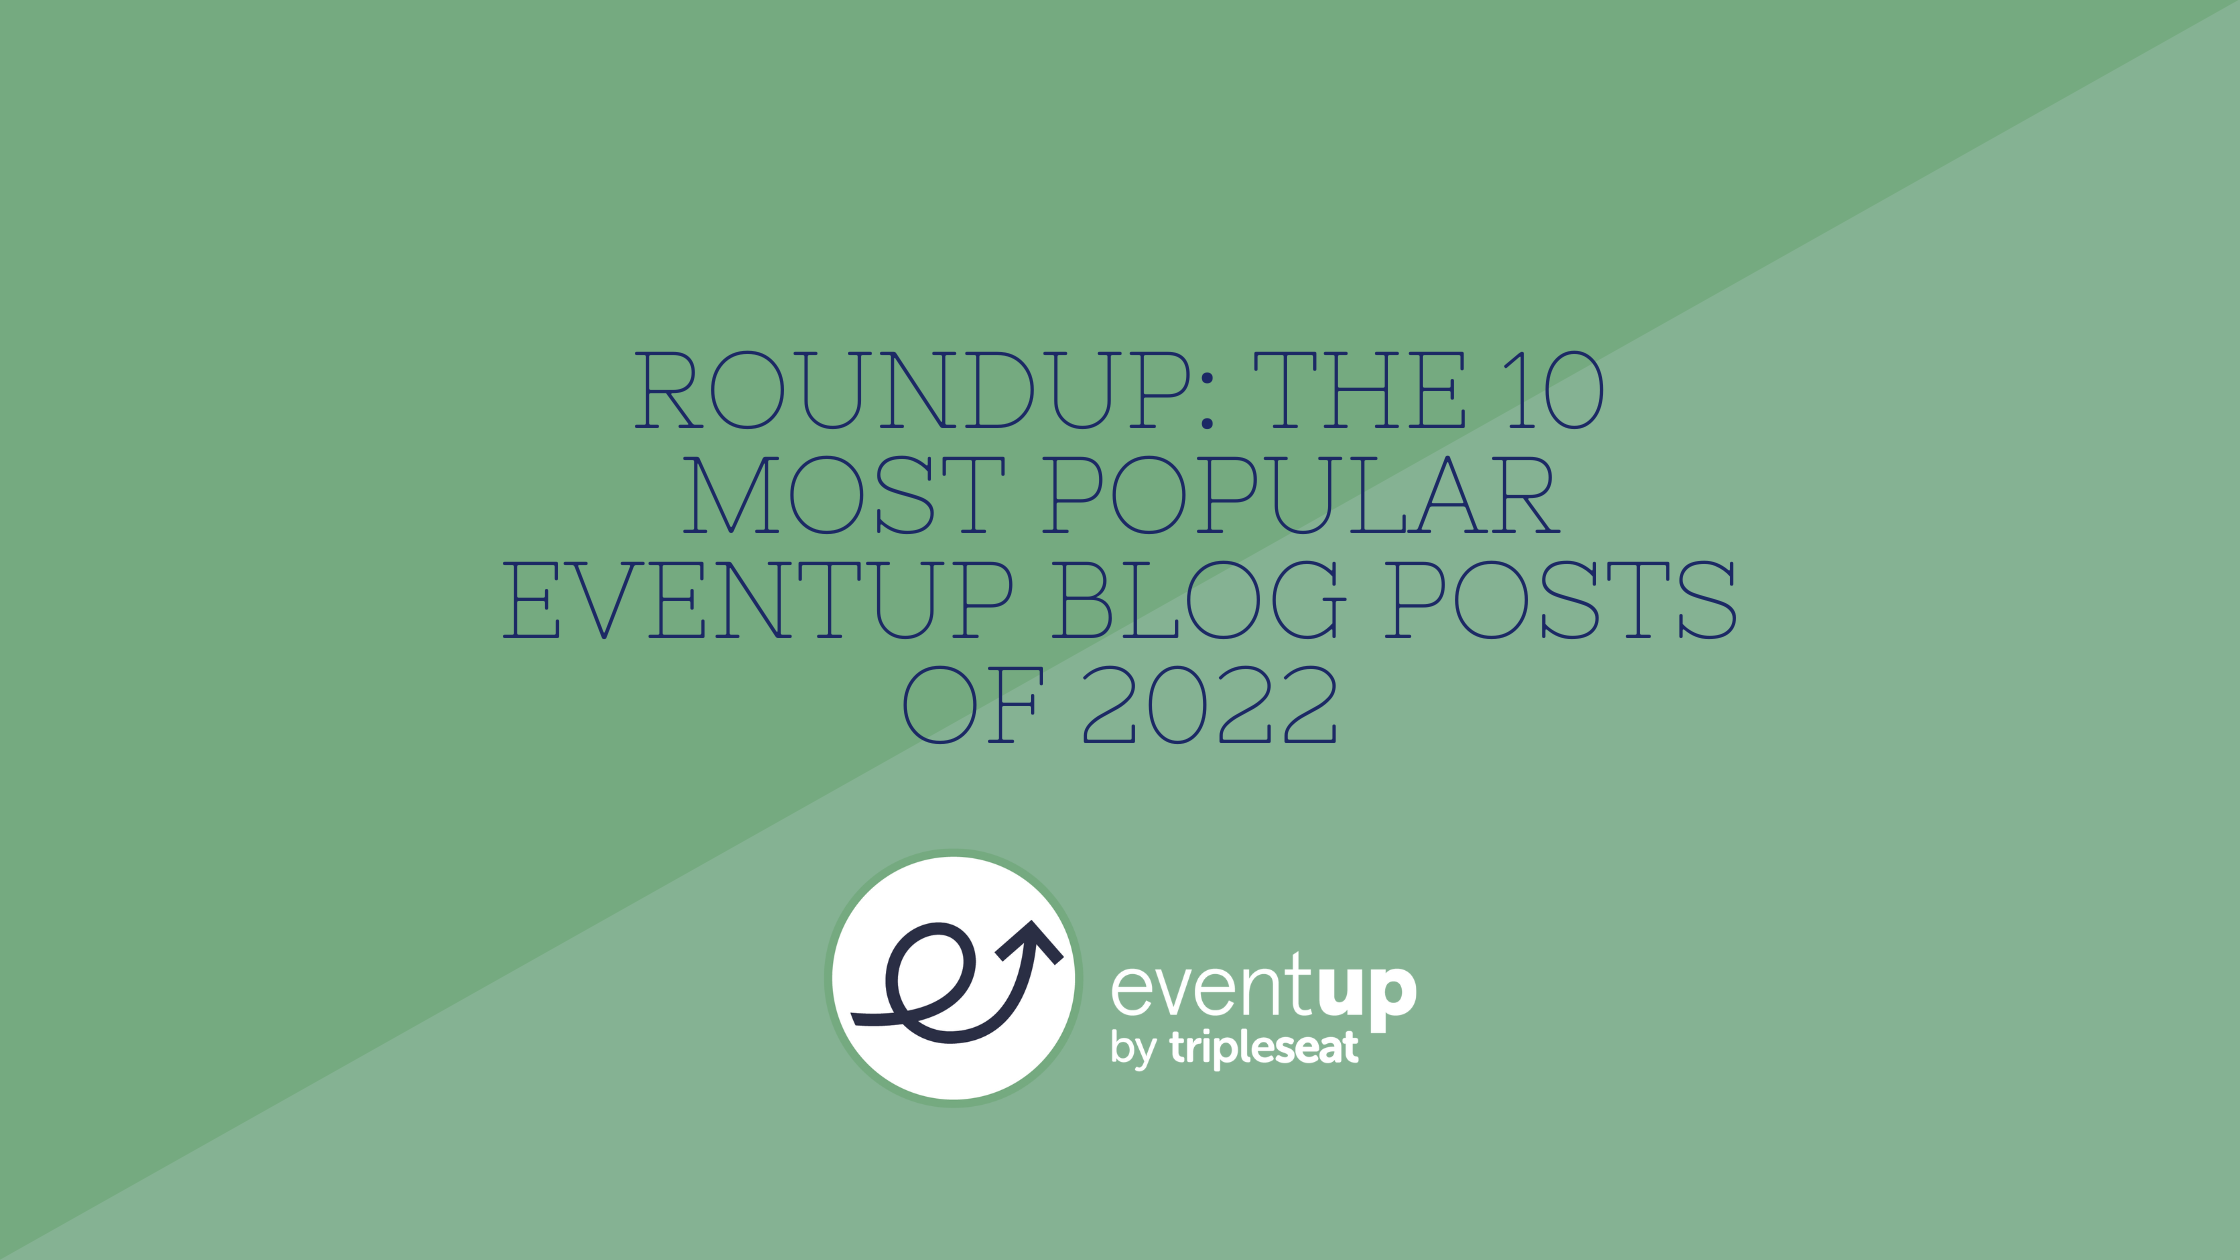 Roundup: The 10 Most Popular EventUp Blog Posts of 2022